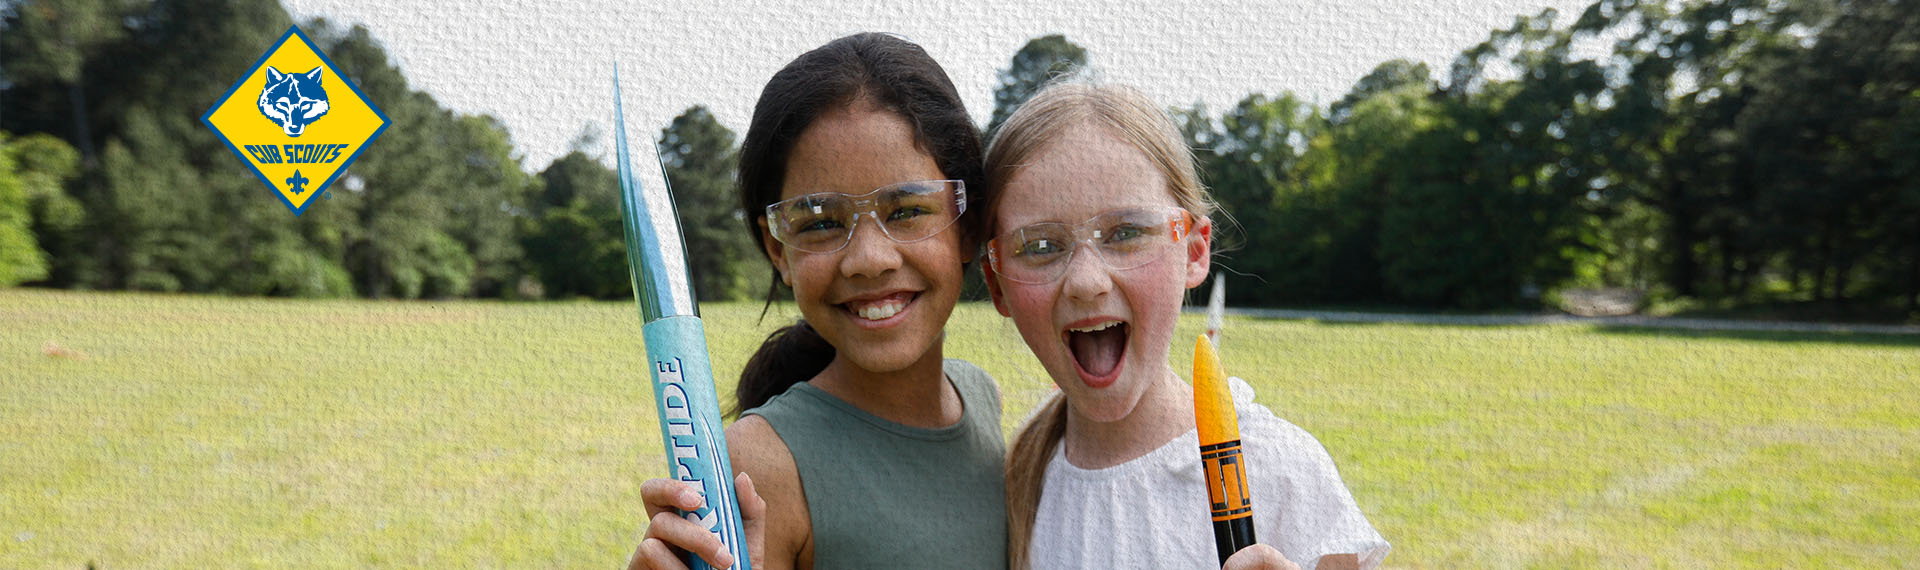 Two female Scouts excitedly cheering while holding model rockets